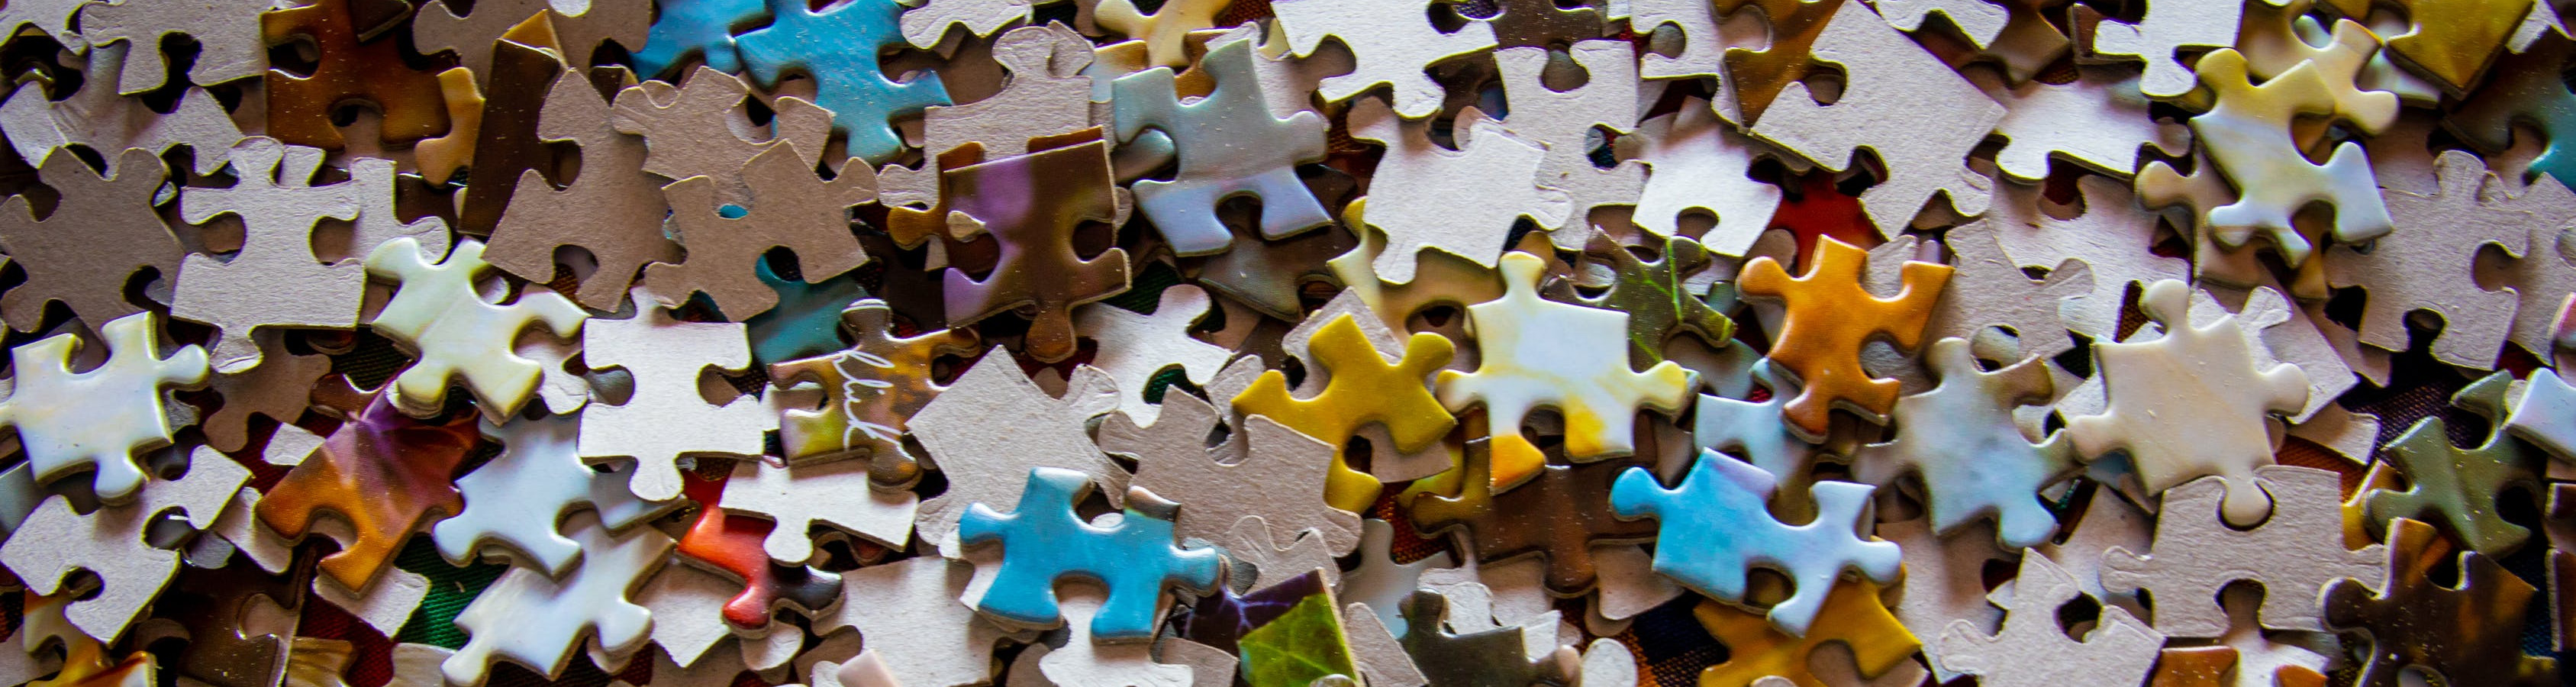 A pile of jigsaw puzzle pieces as an analogy for a mixed data set